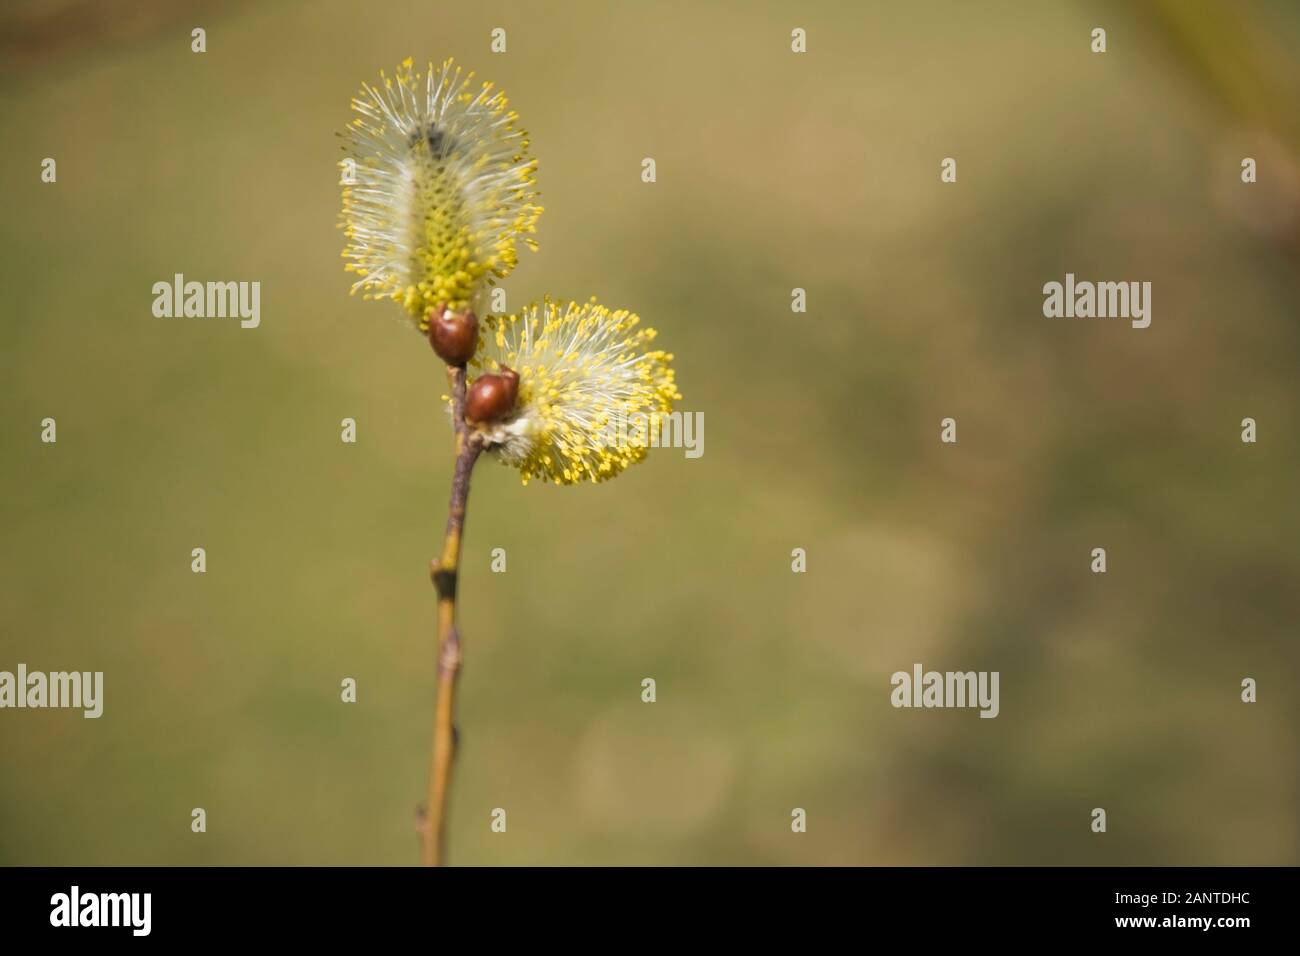 Close-up of Salix 'Smith' Willow tree buds and flower blossoms in spring Stock Photo